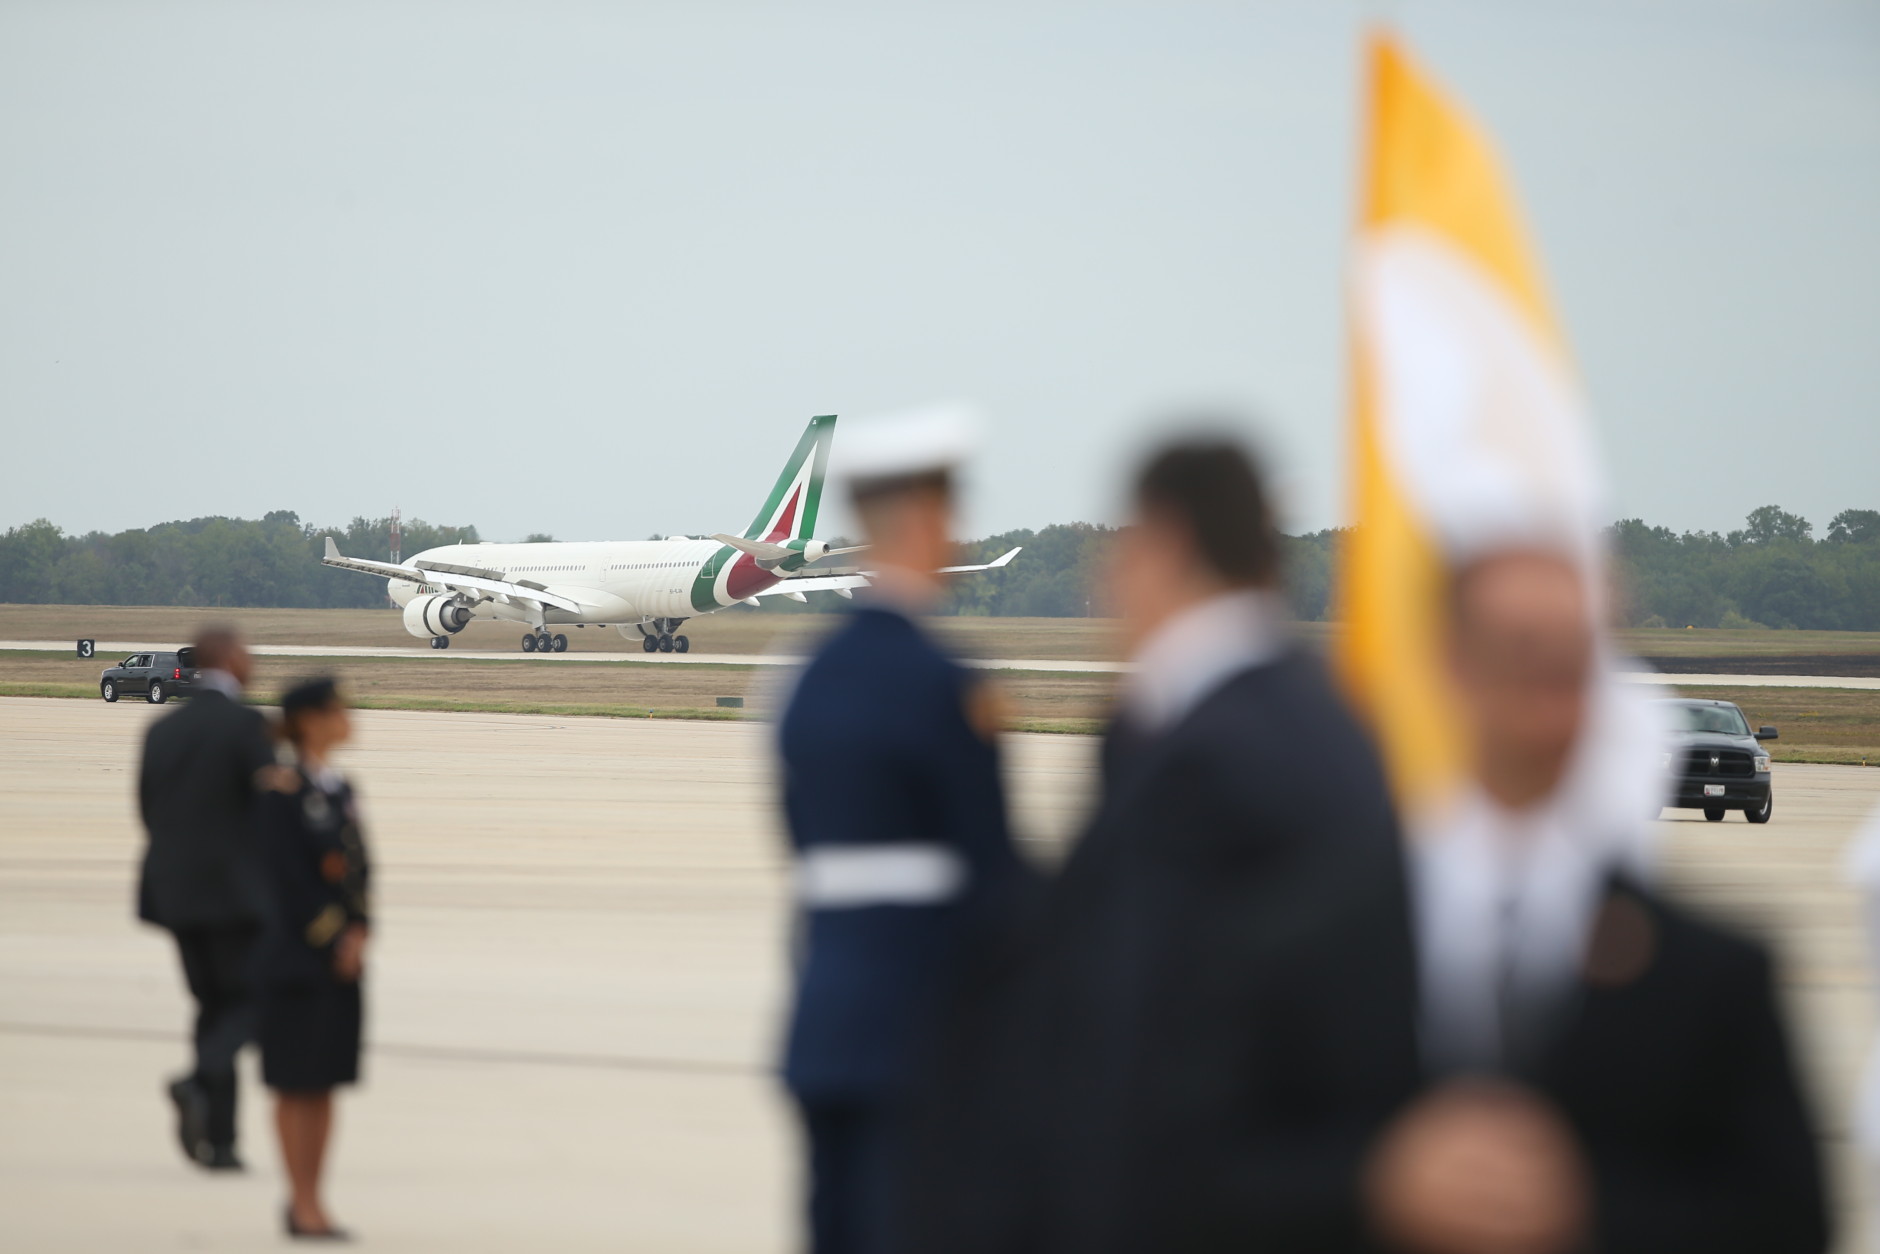 The plane carrying Pope Francis plane arrives at Andrews Air Force Base, Md., Tuesday, Sept. 22, 2015. (AP Photo/Andrew Harnik)